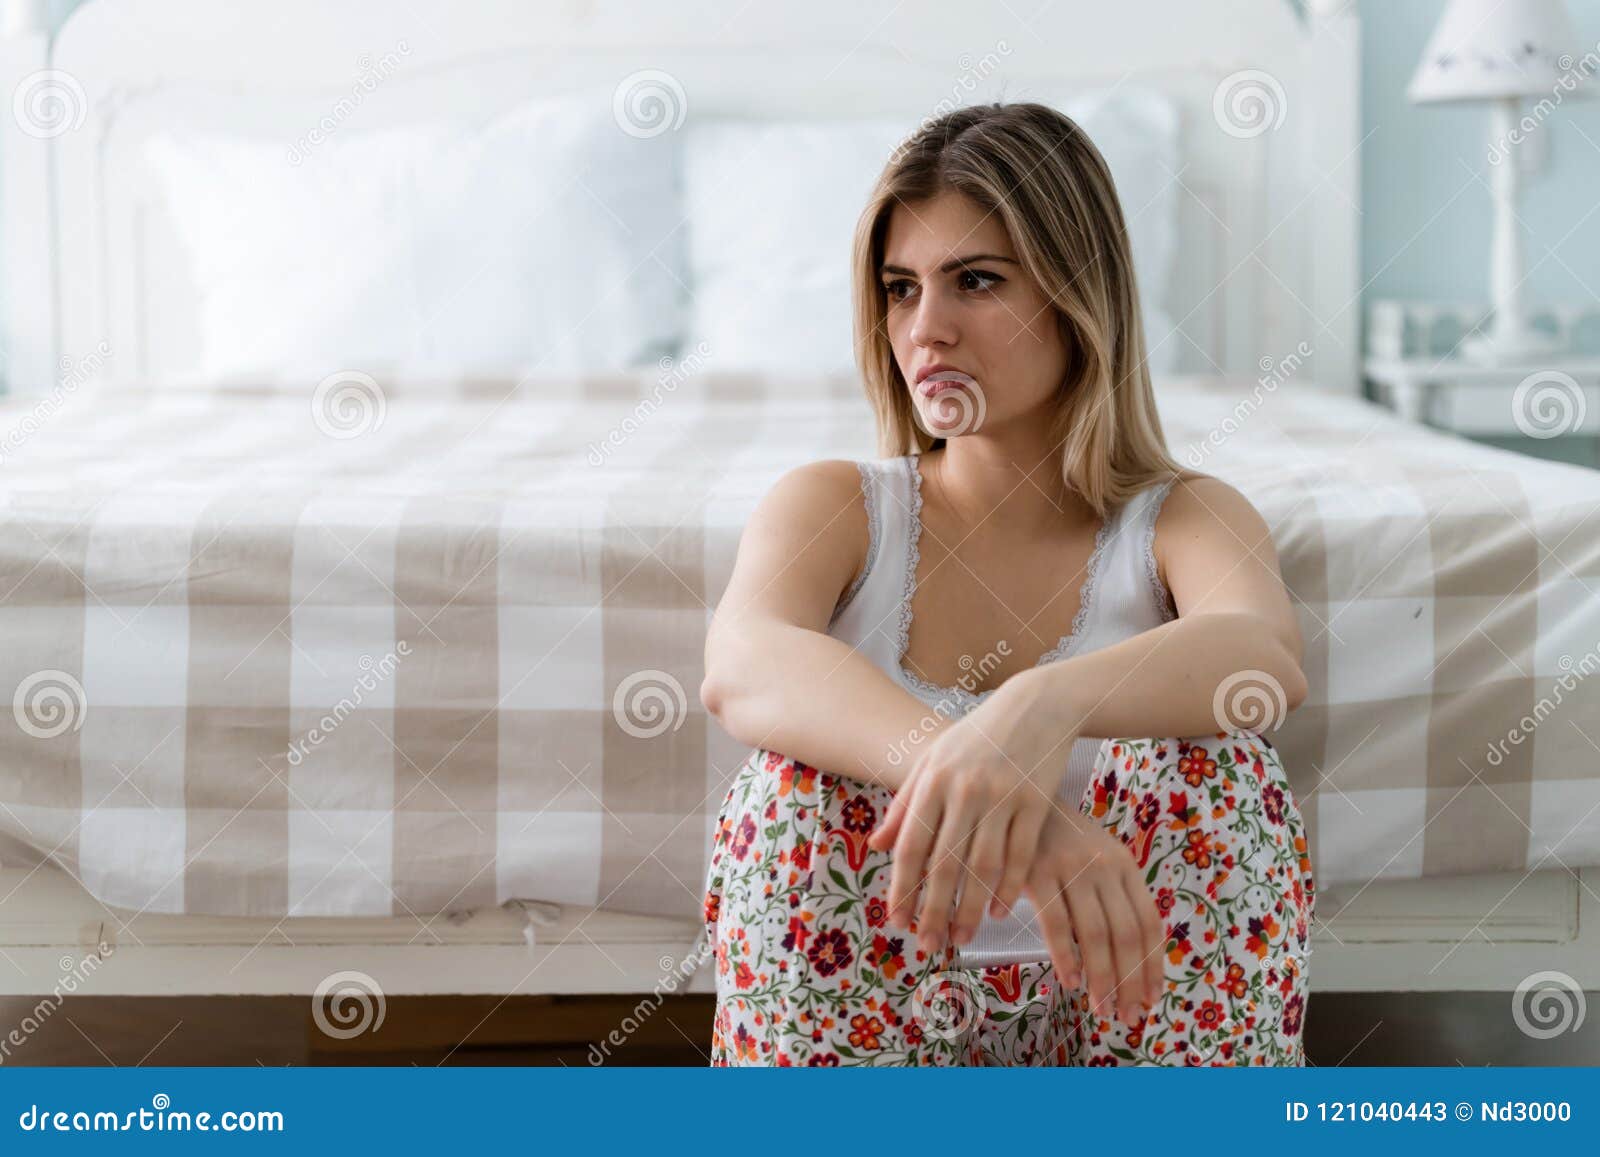 Single Beautiful Woman Sad and Lonely in Bedroom Stock Image ...